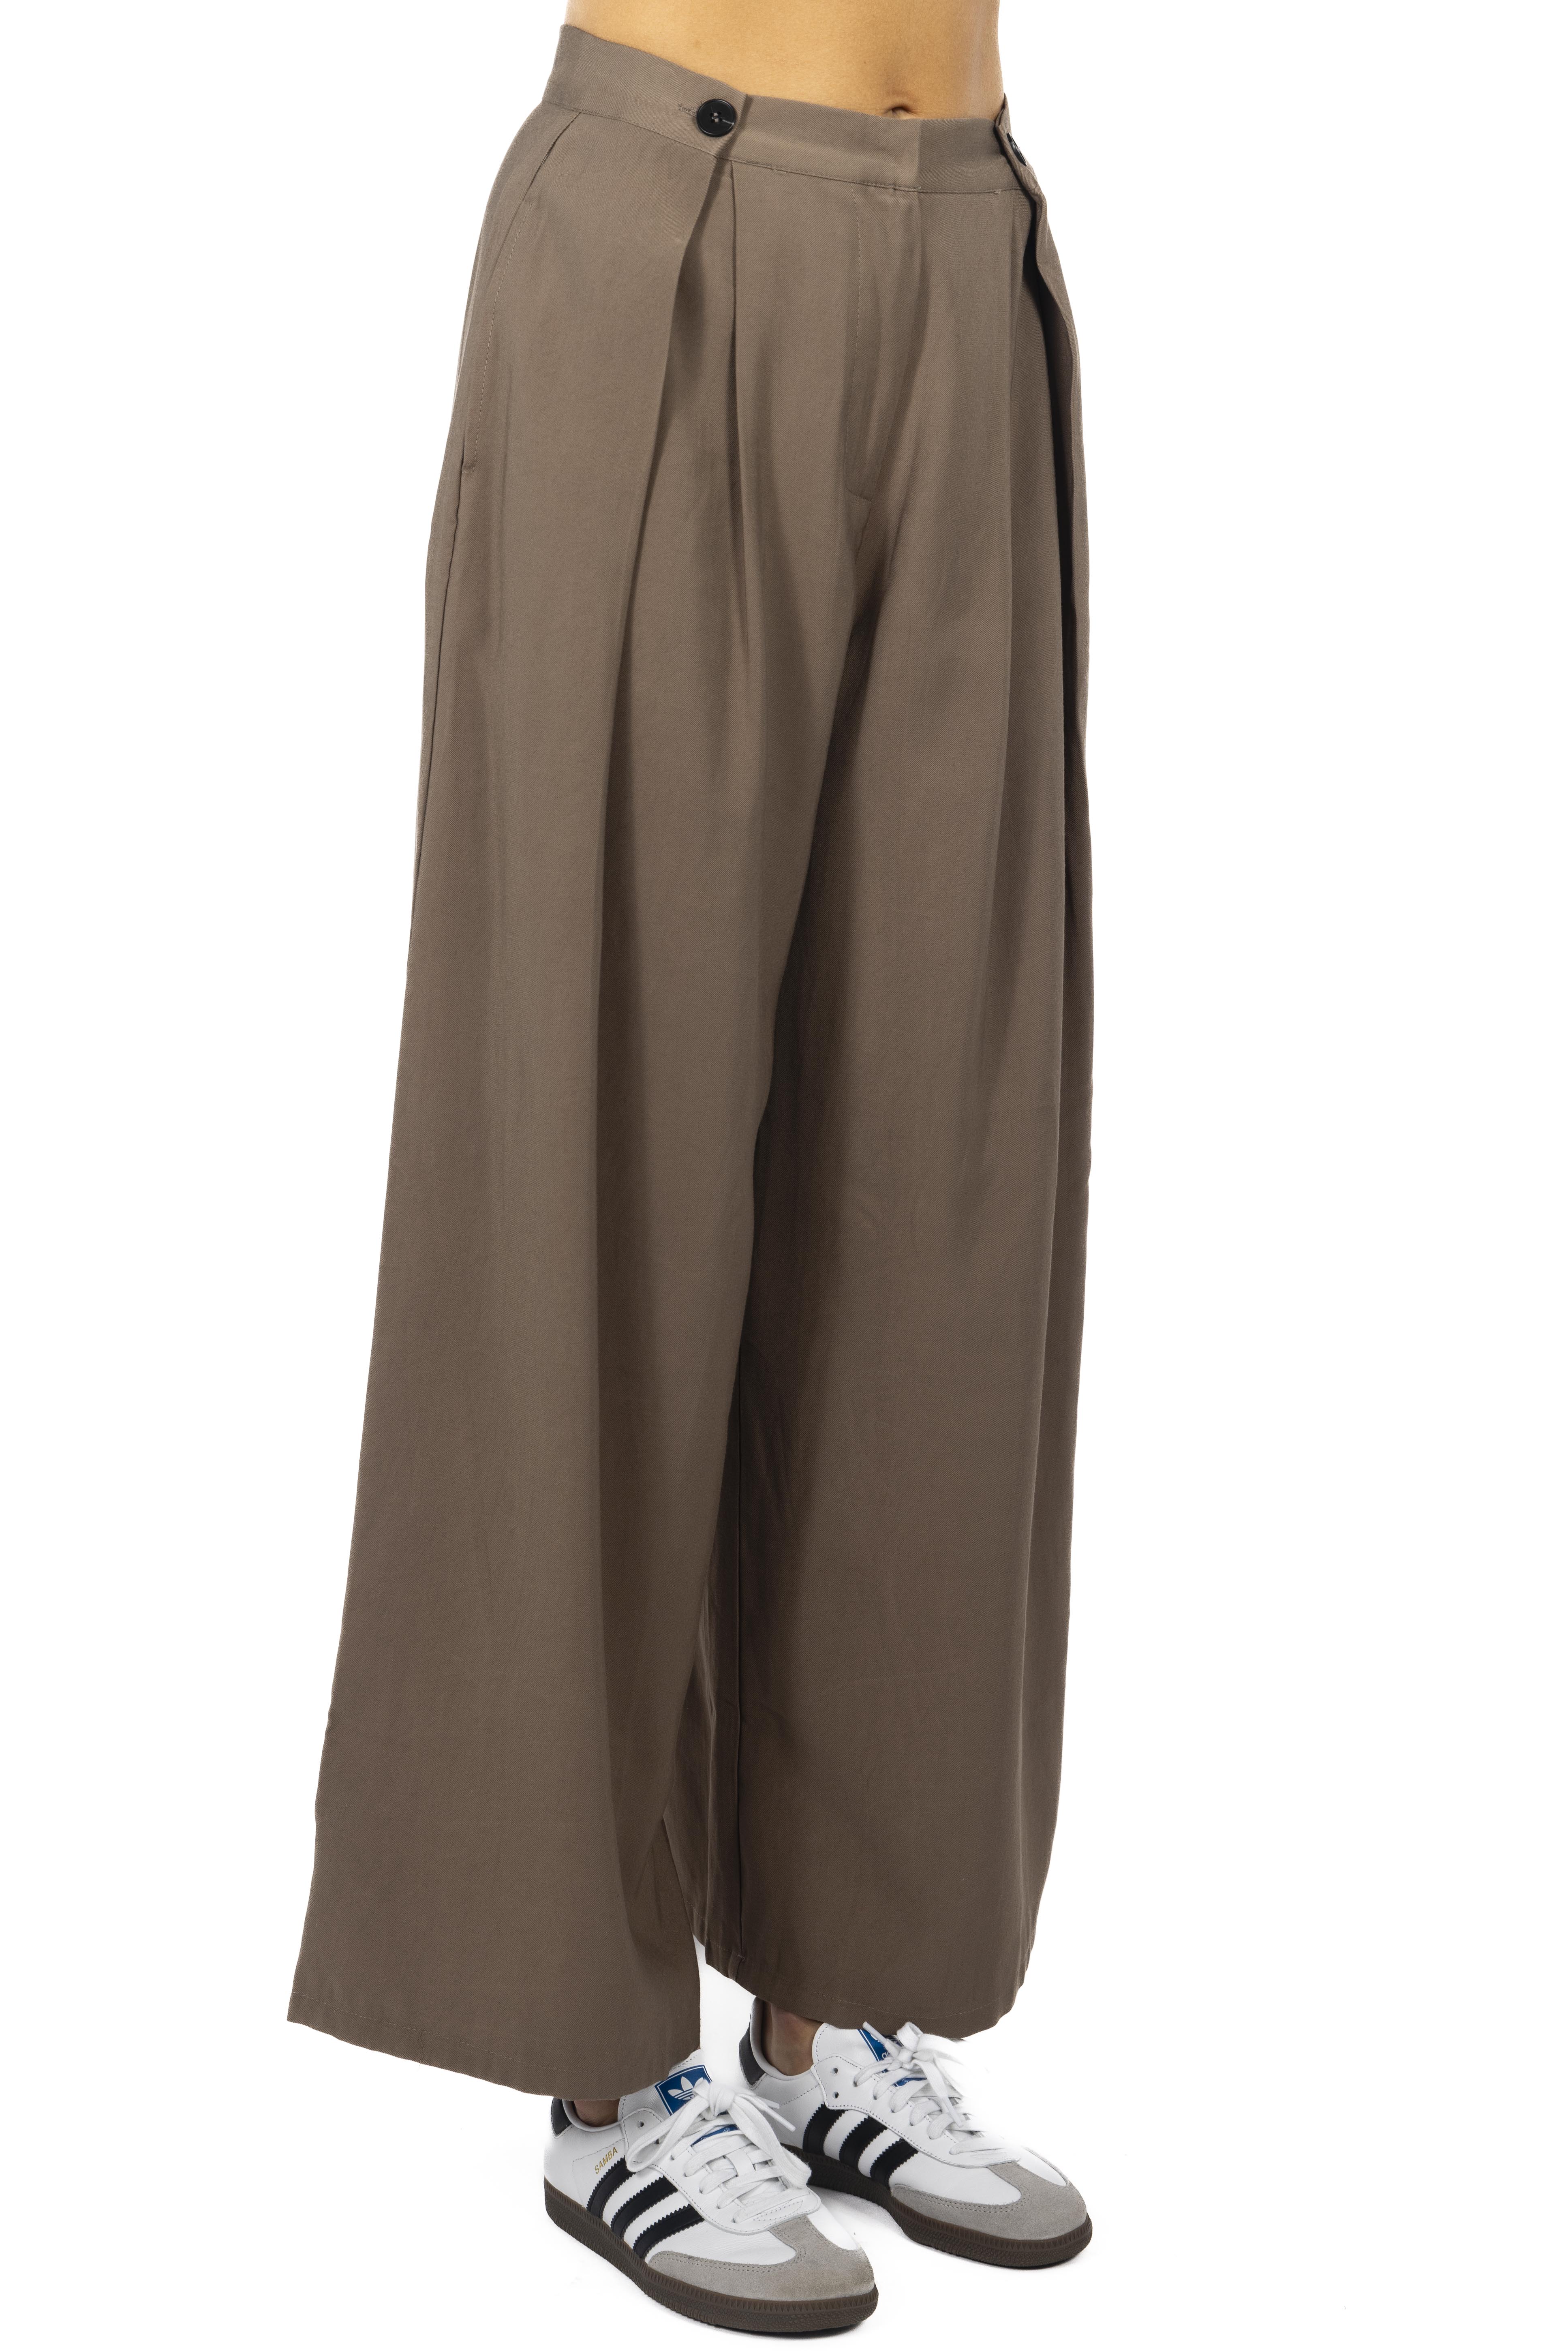 CAMEL BUTTONED TROUSERS